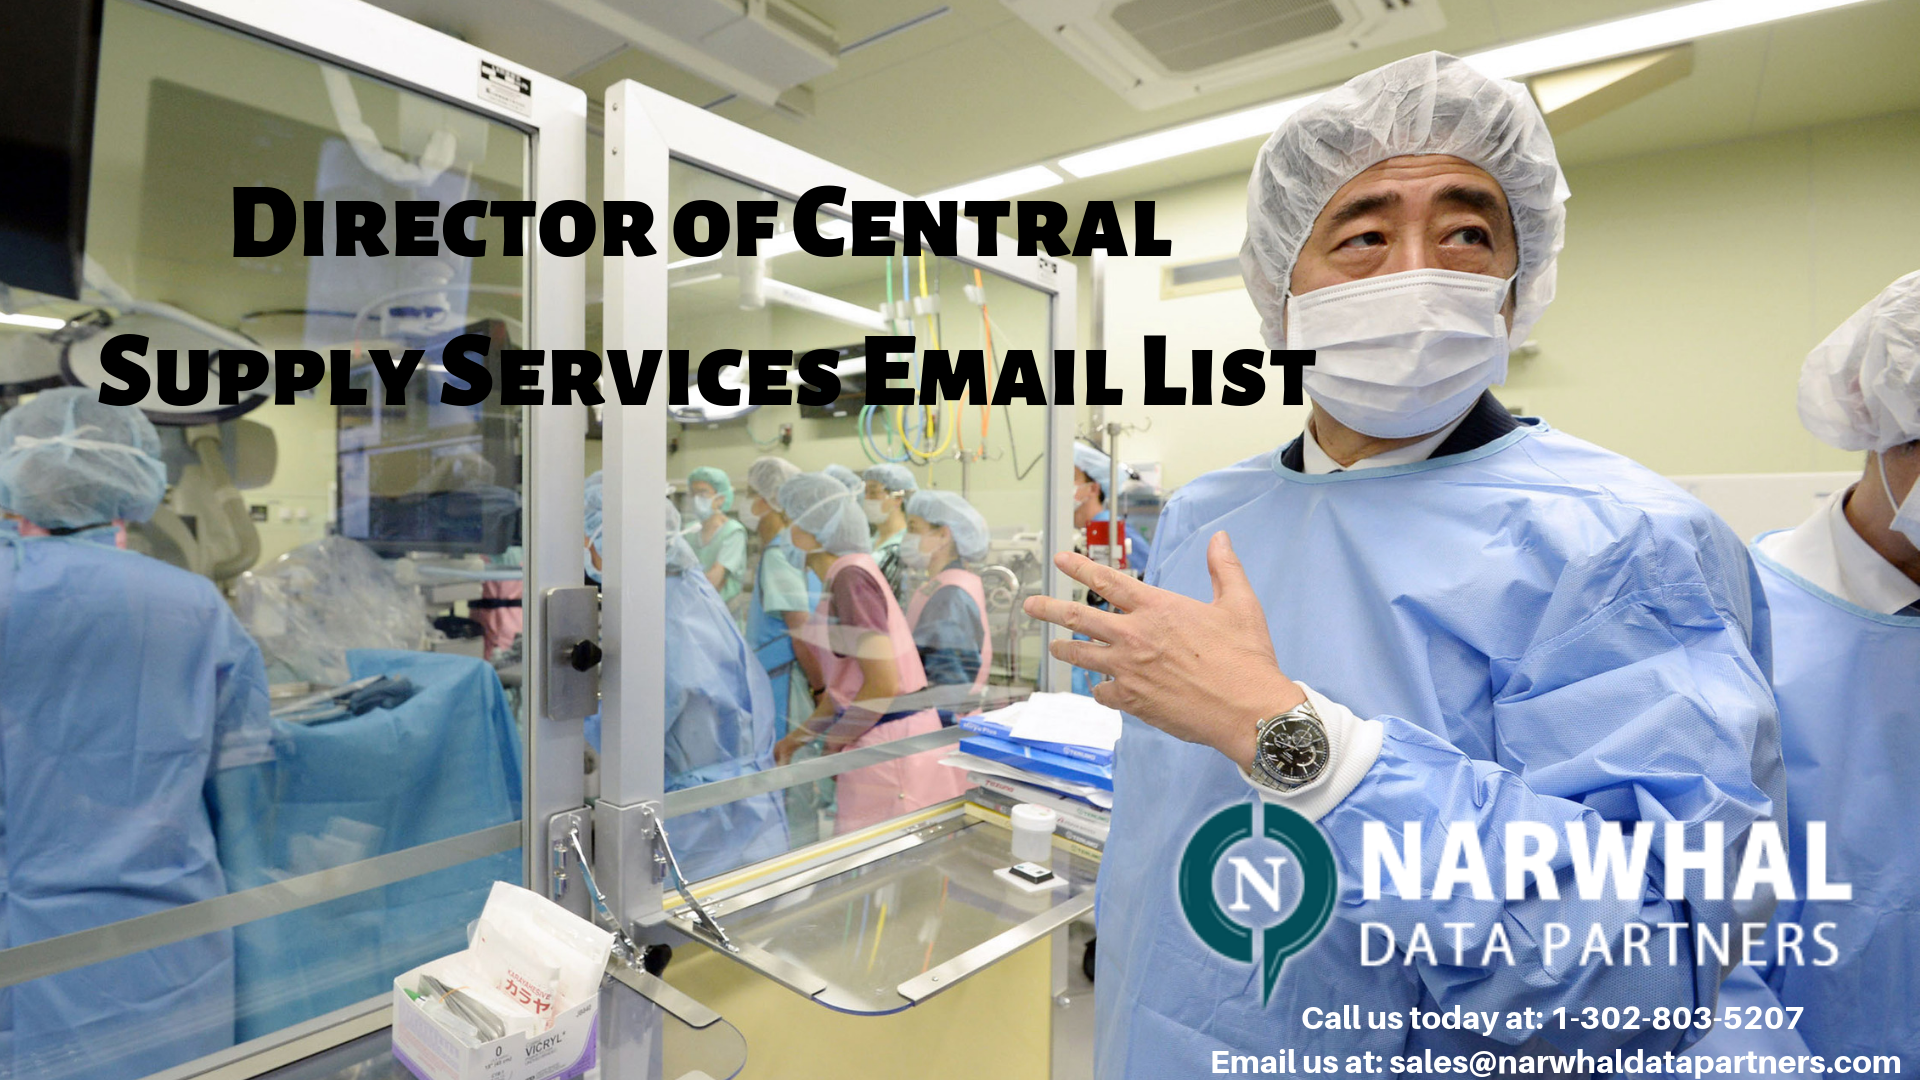 http://narwhaldatapartners.com/director-of-central-supply-services-email-list.html